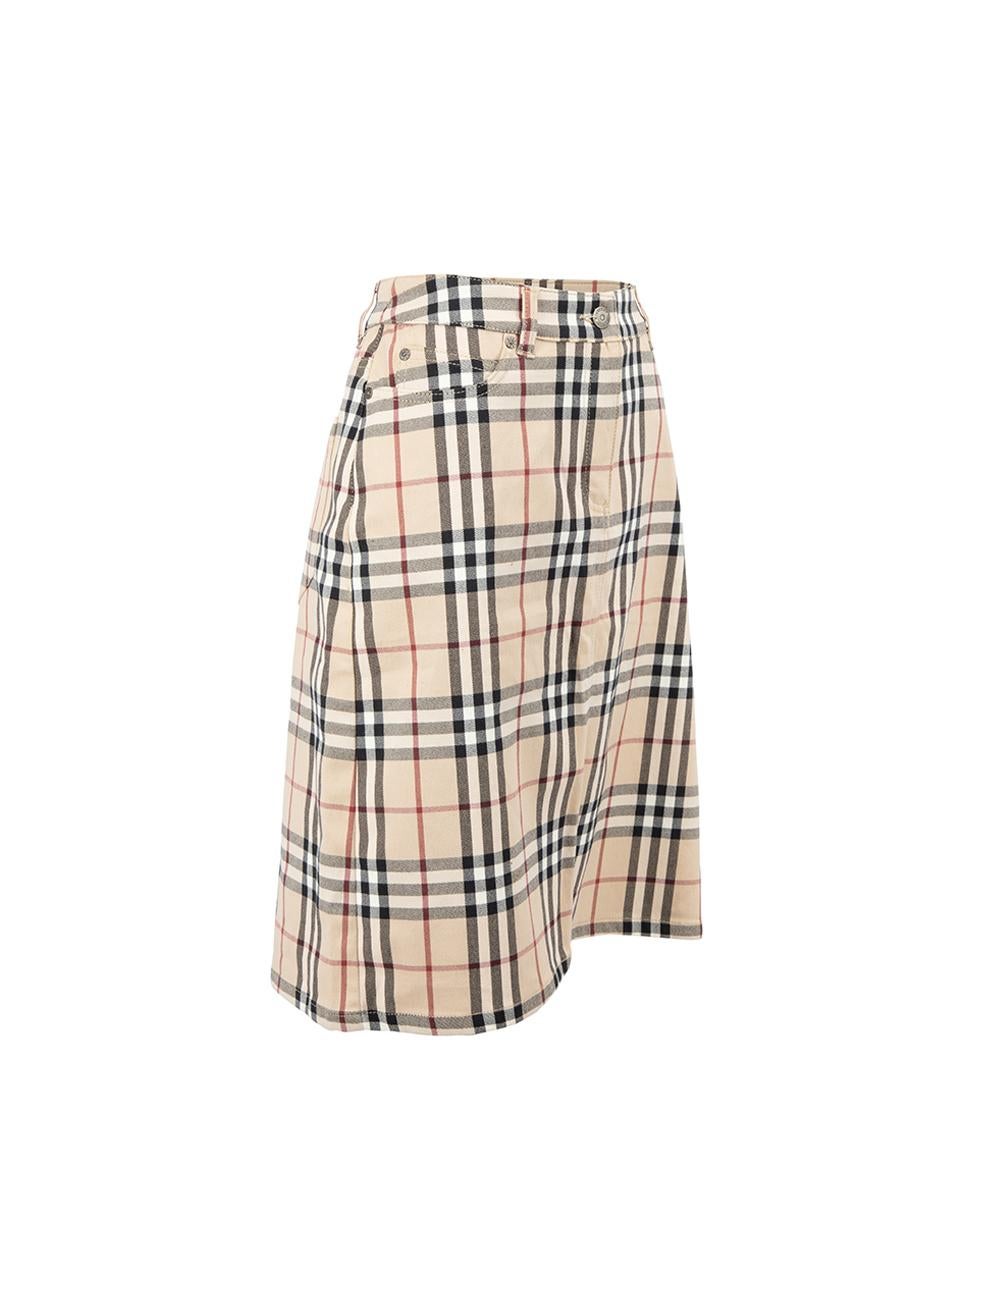 CONDITION is Very good. Minimal wear to skirt is evident. Minimal wear to the outer fabric where small stains are spotted around on this used Burberry designer resale item. 



Details


Beige

Cotton

Mini A-line skirt

Signature Burberry check